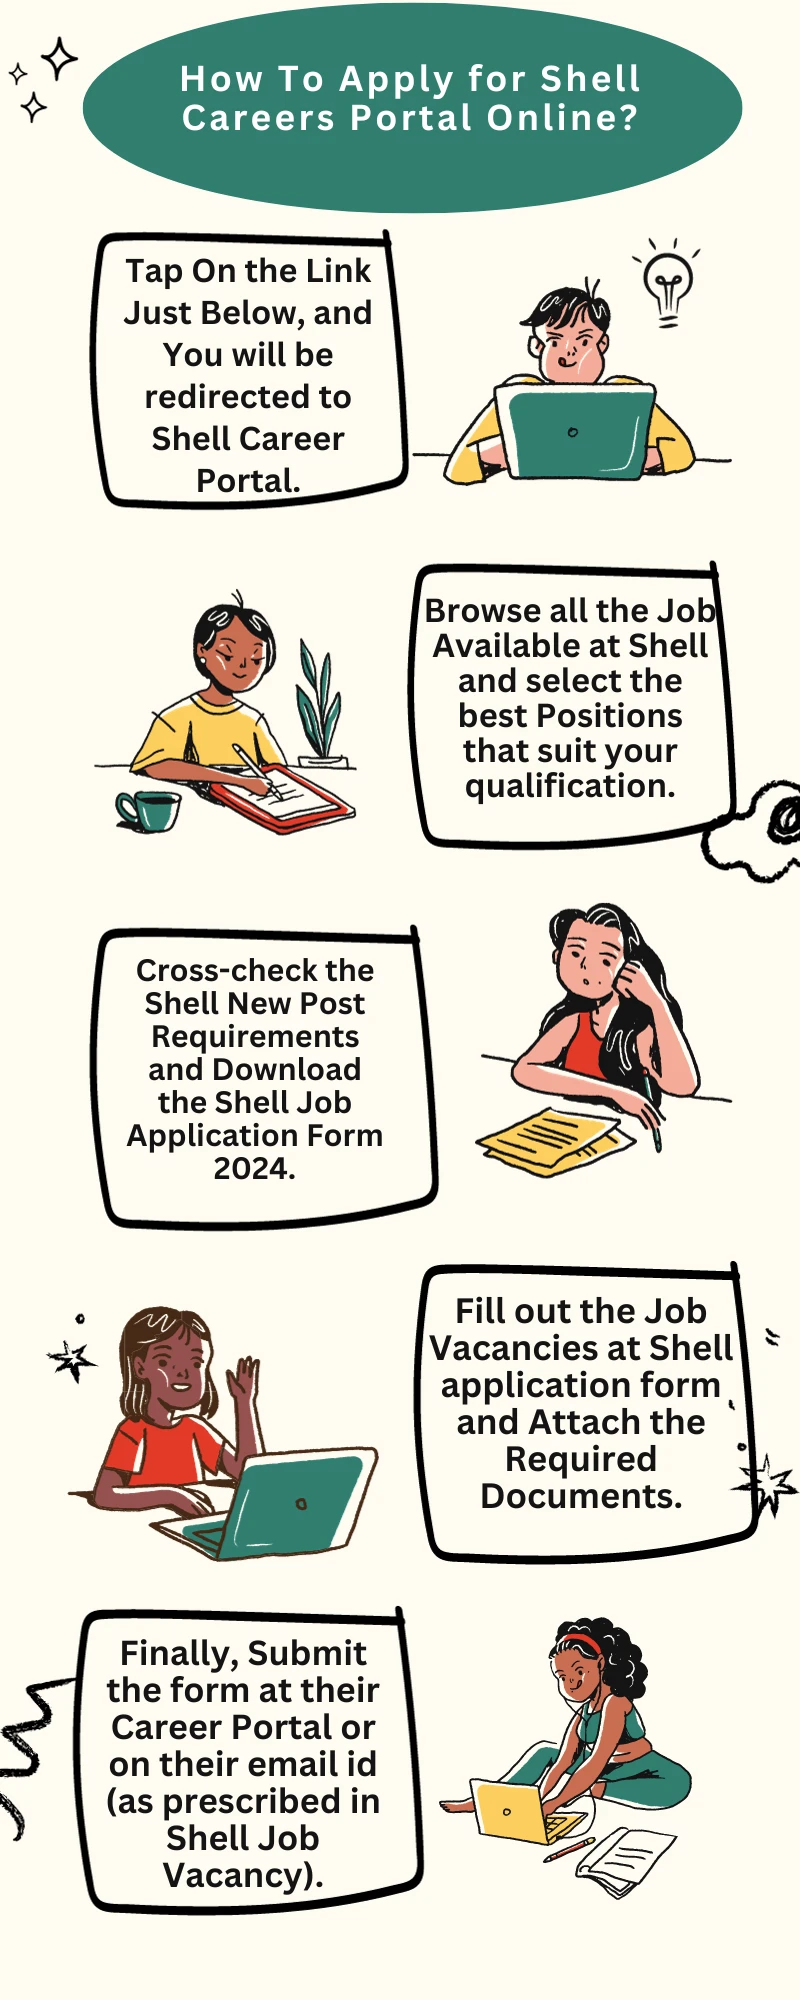 How To Apply for Shell Careers Portal Online?